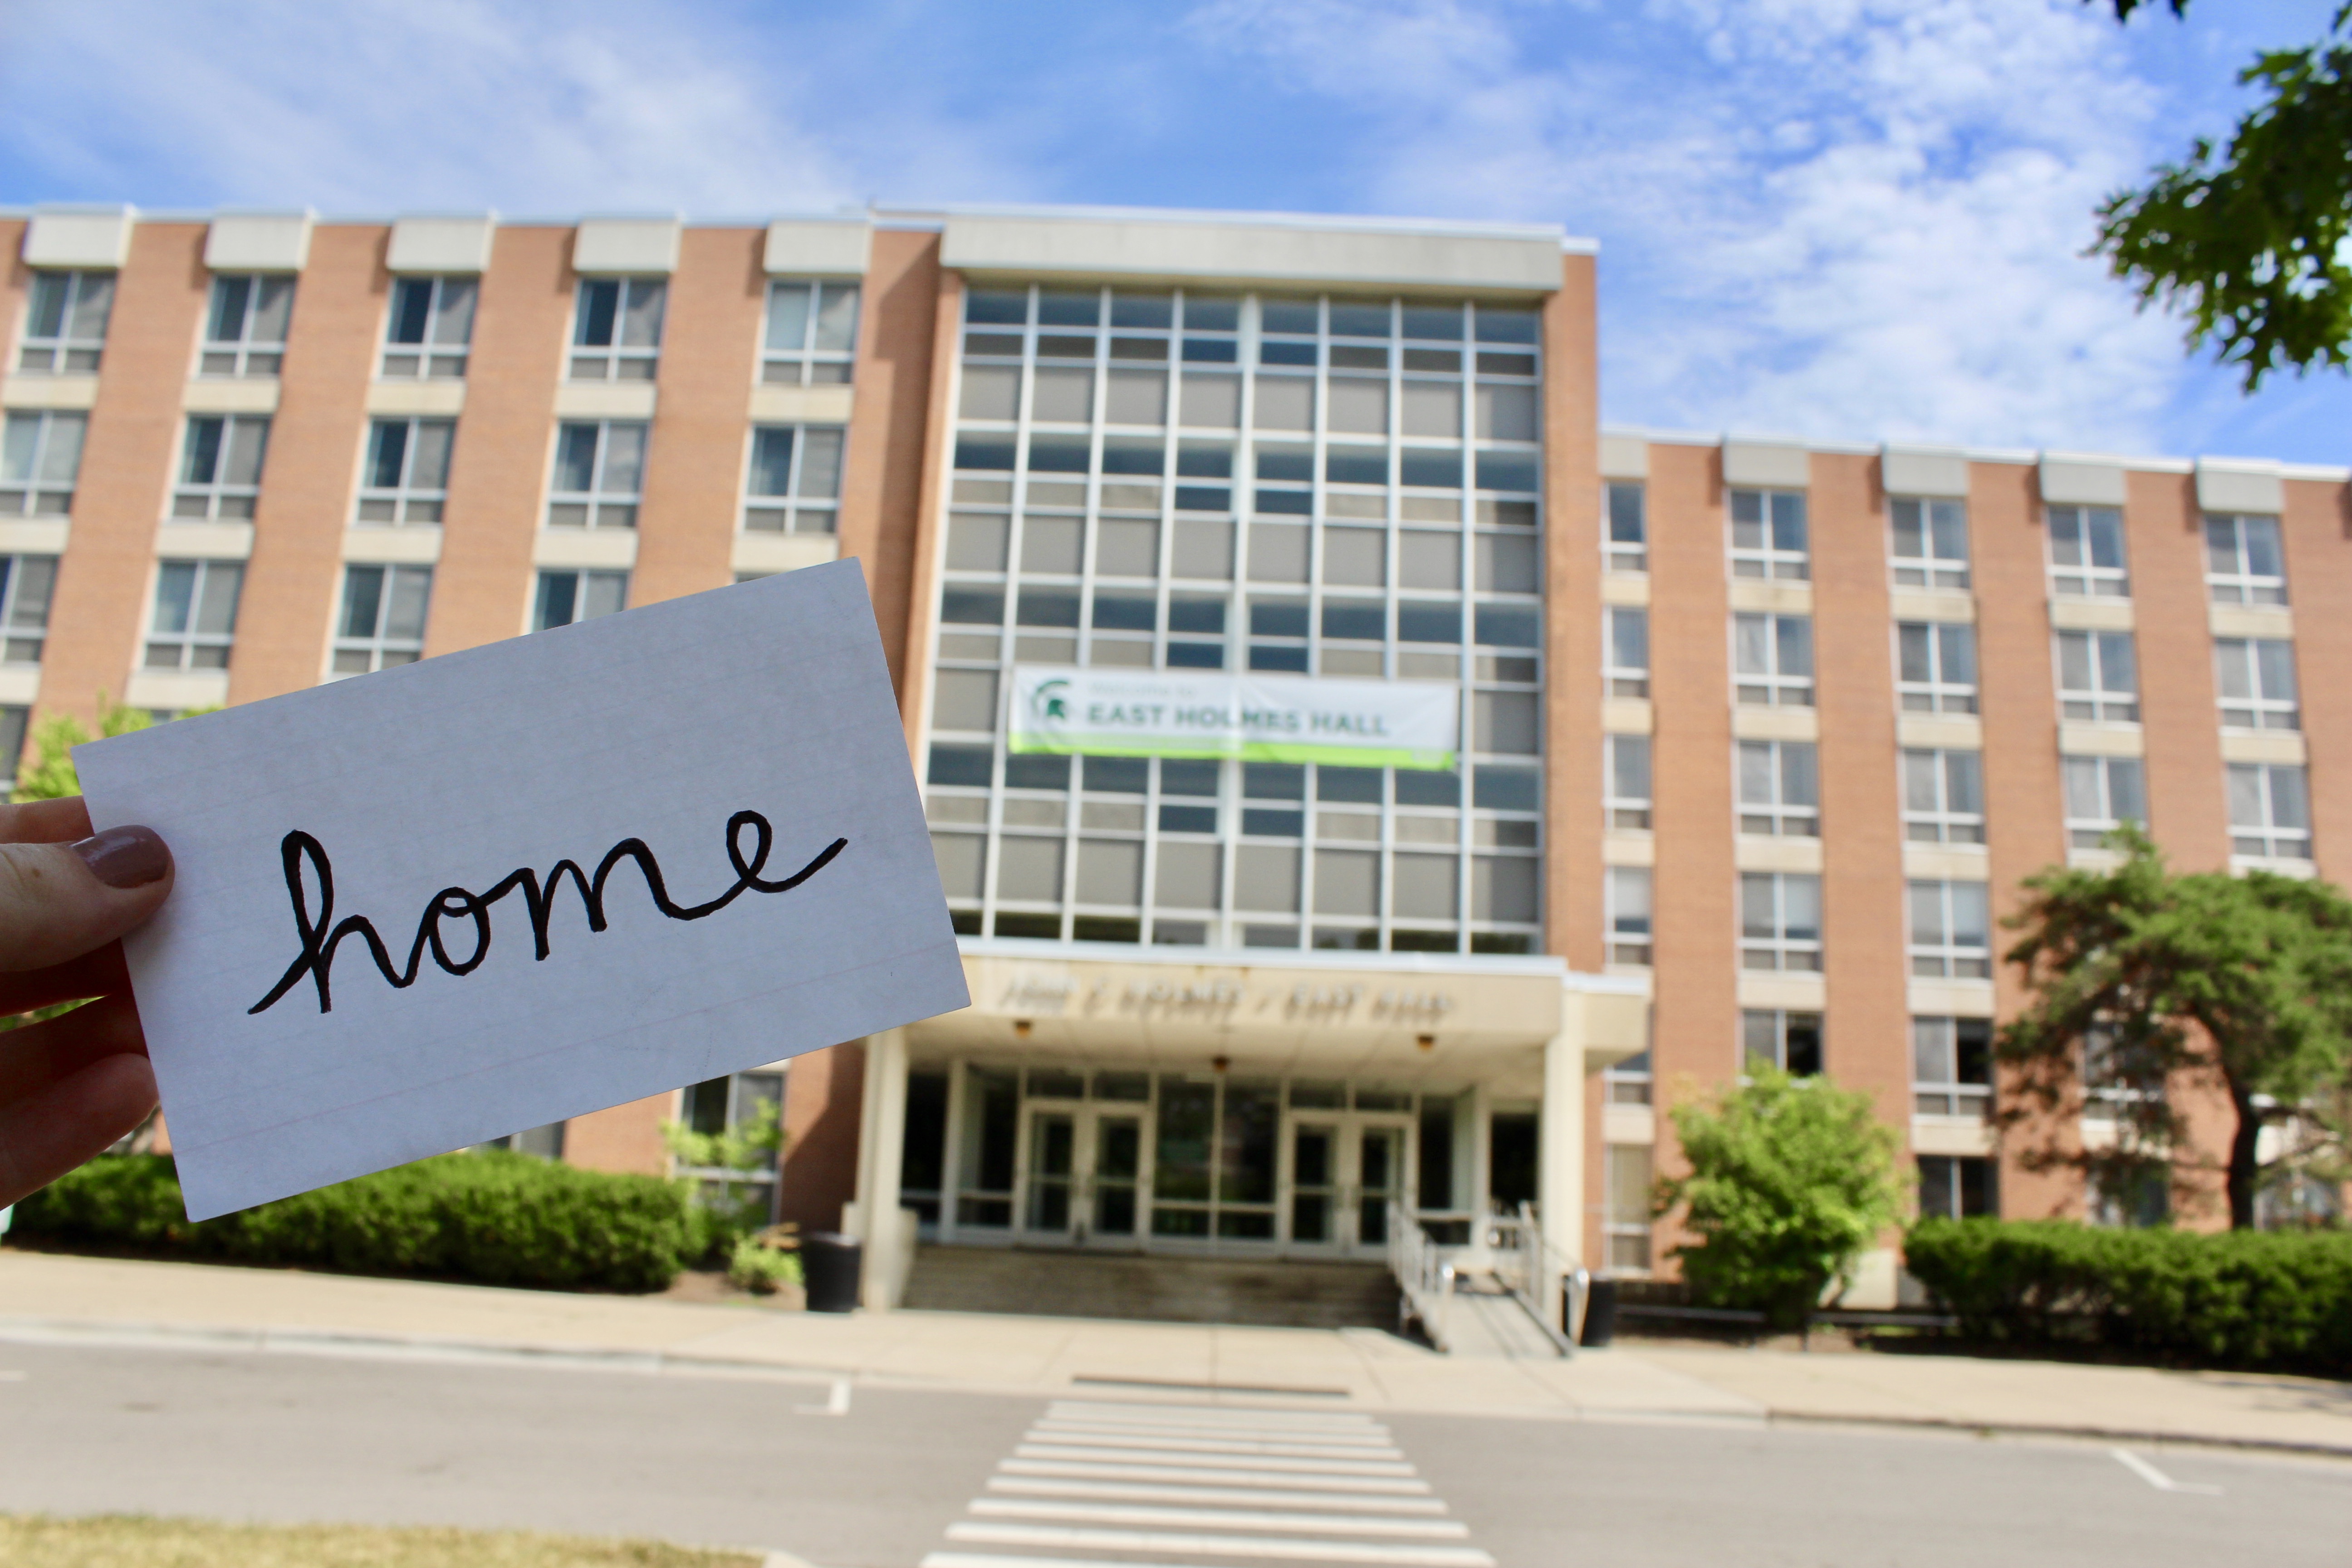 Holmes Hall in the background with the word "home" written on a card in the foreground